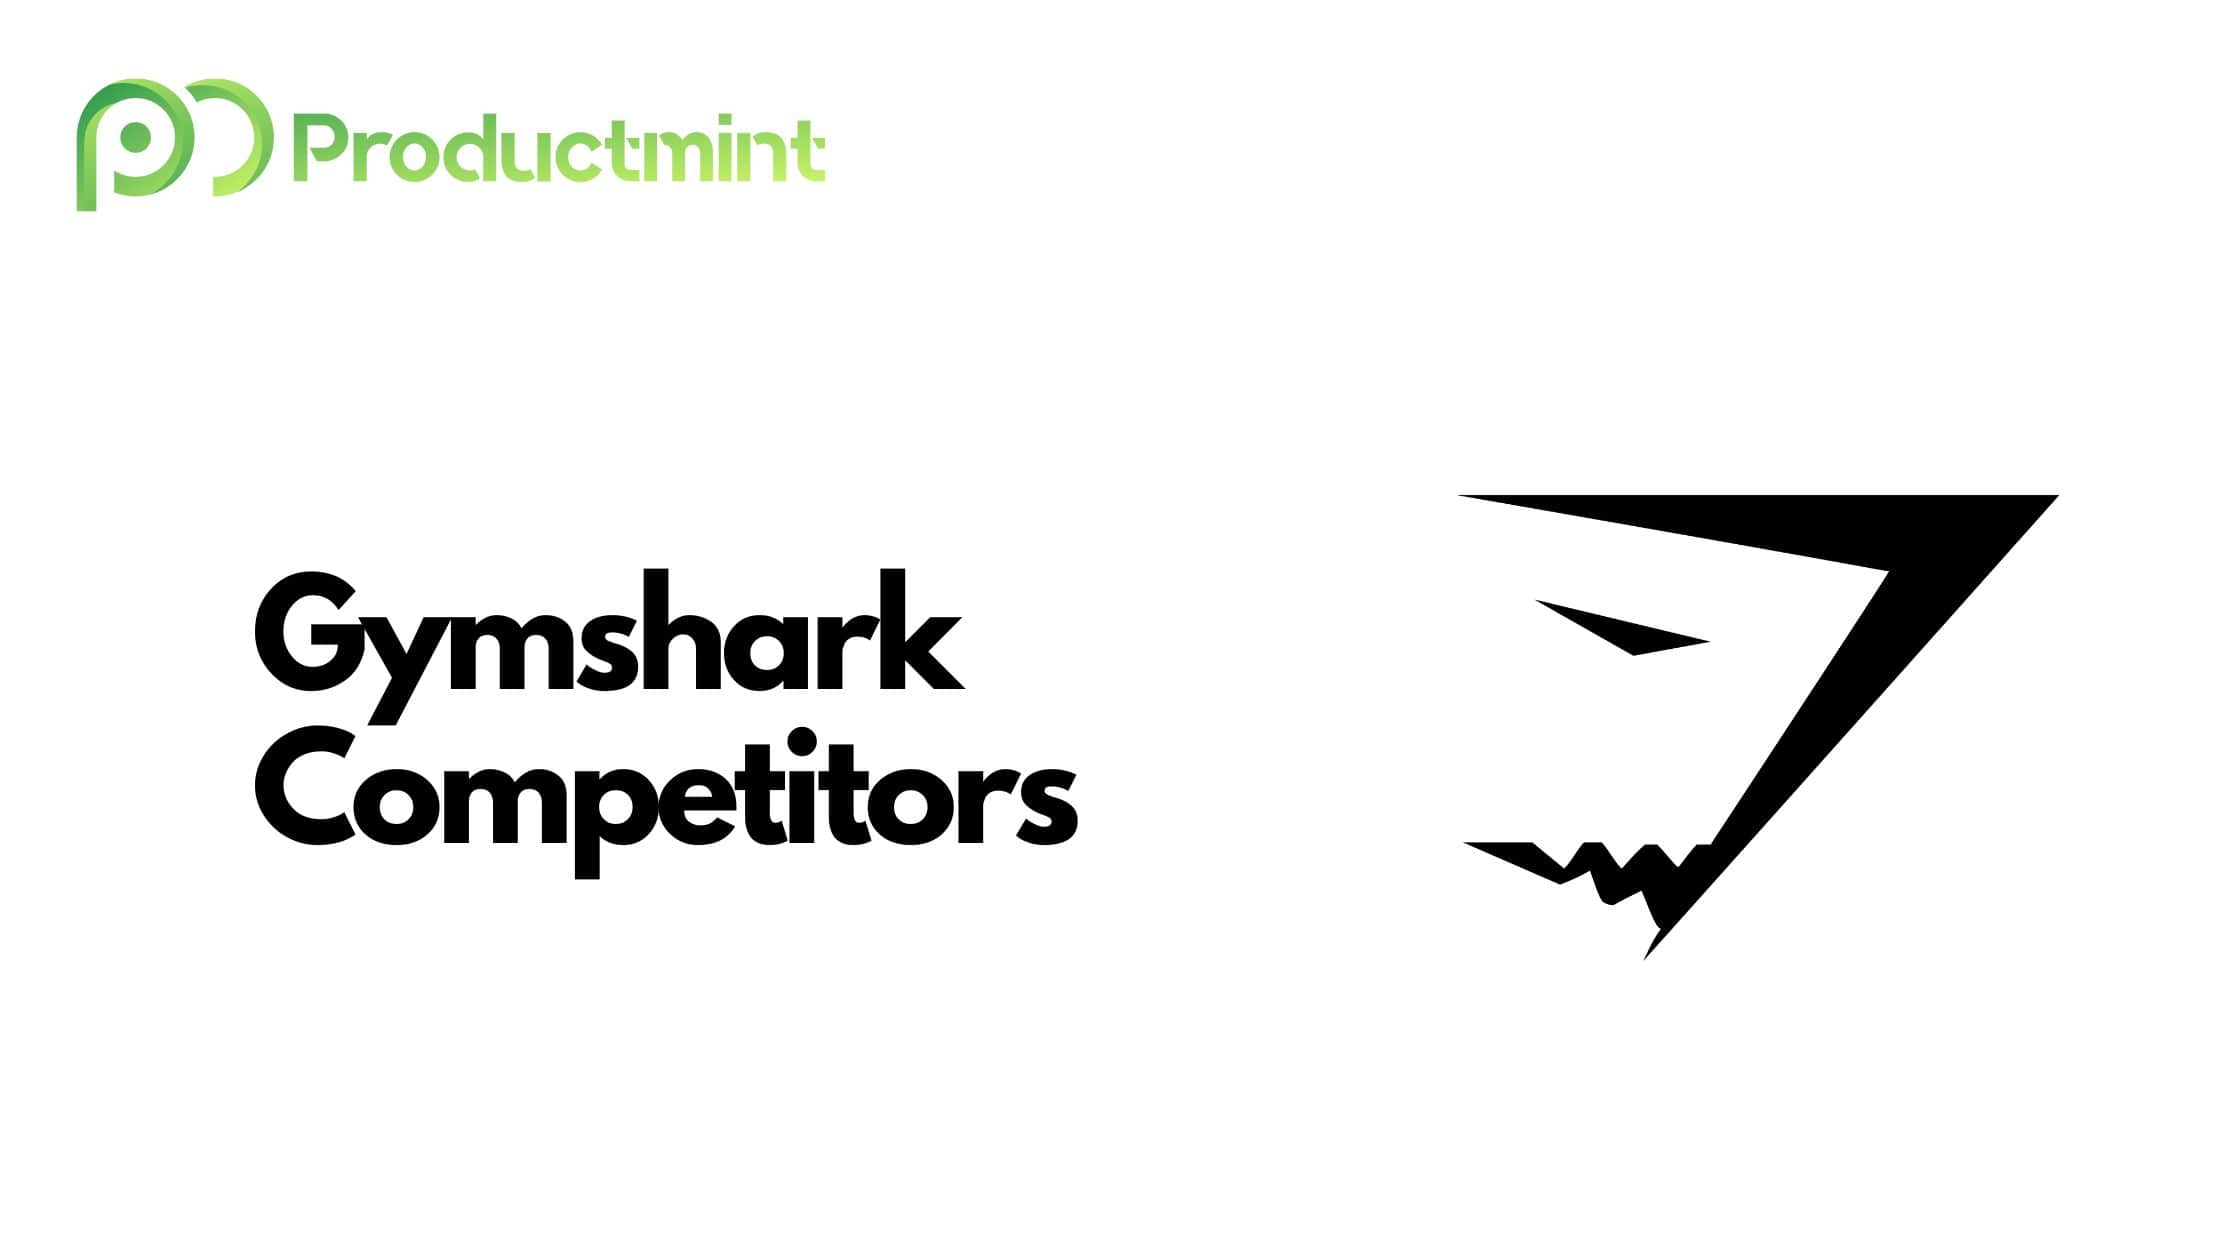 Gymshark Competitors